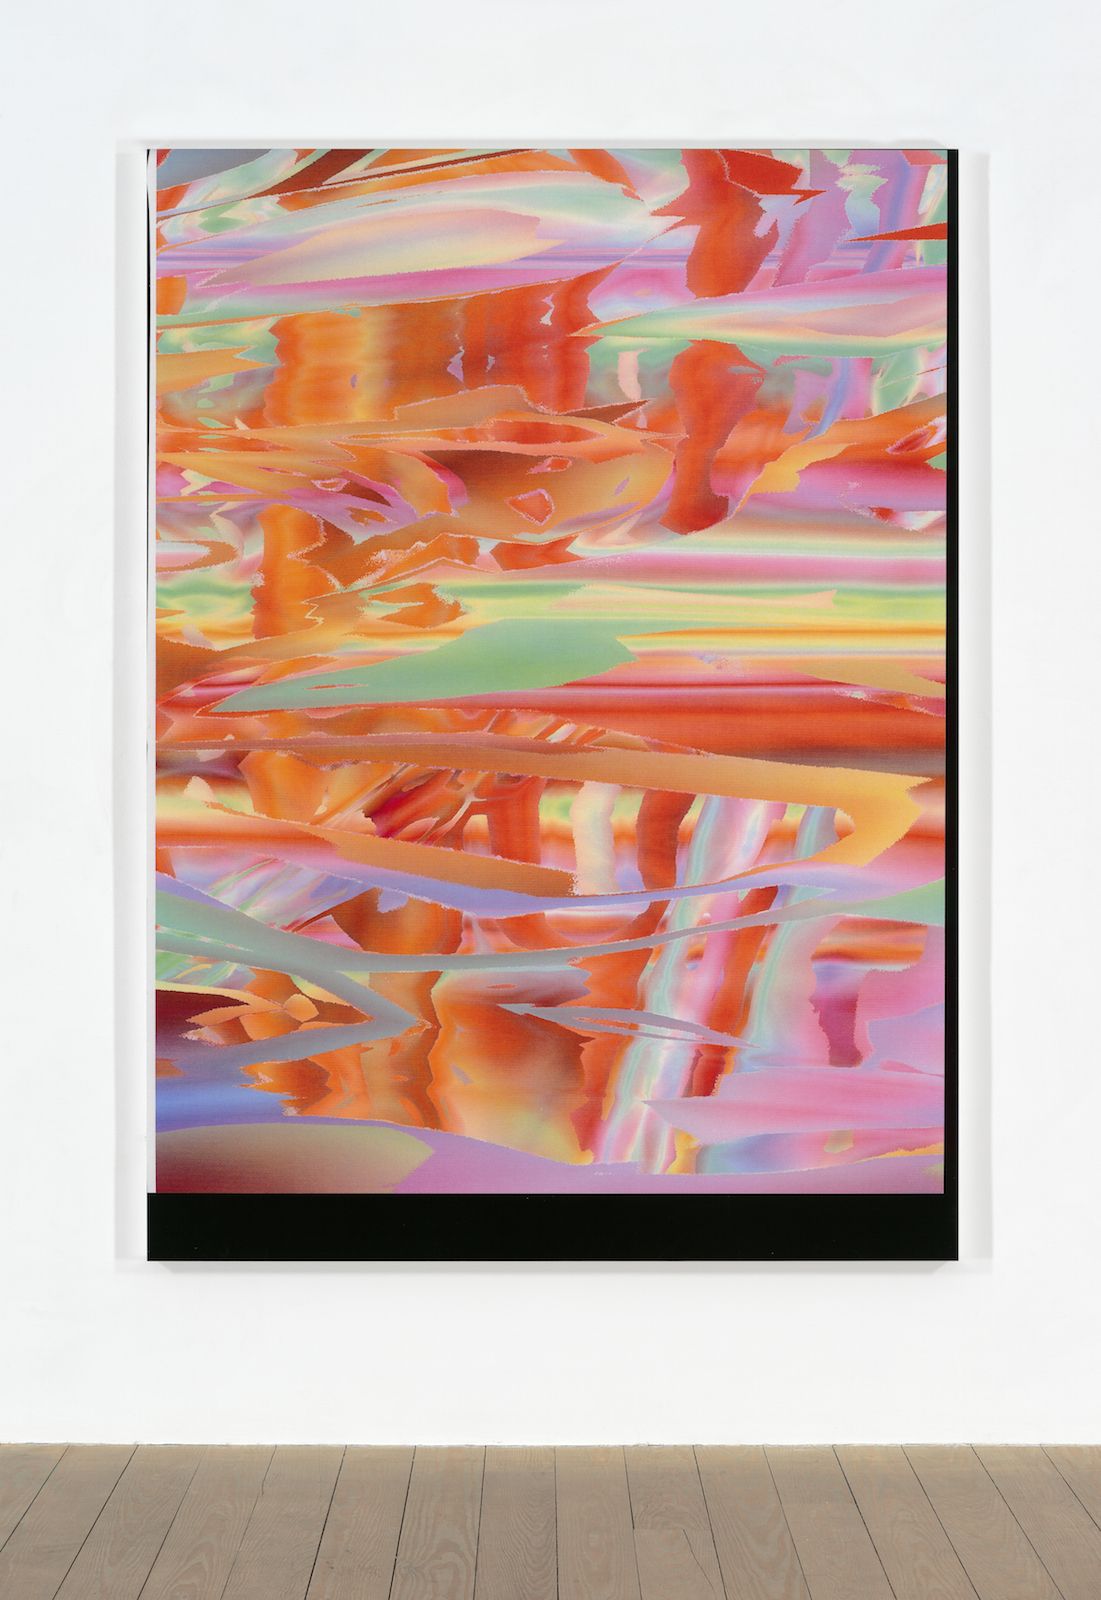 Travess Smalley, Untitled (Feb_9_2015_Lulu_Book_02_Page_Scans 04), 2015, UV coated digital pigment print mounted on aluminum frame, 81 1⁄2  × 59 1⁄2  × 1 1⁄2  in. ( 207.01  × 151.13  × 3.81  cm)